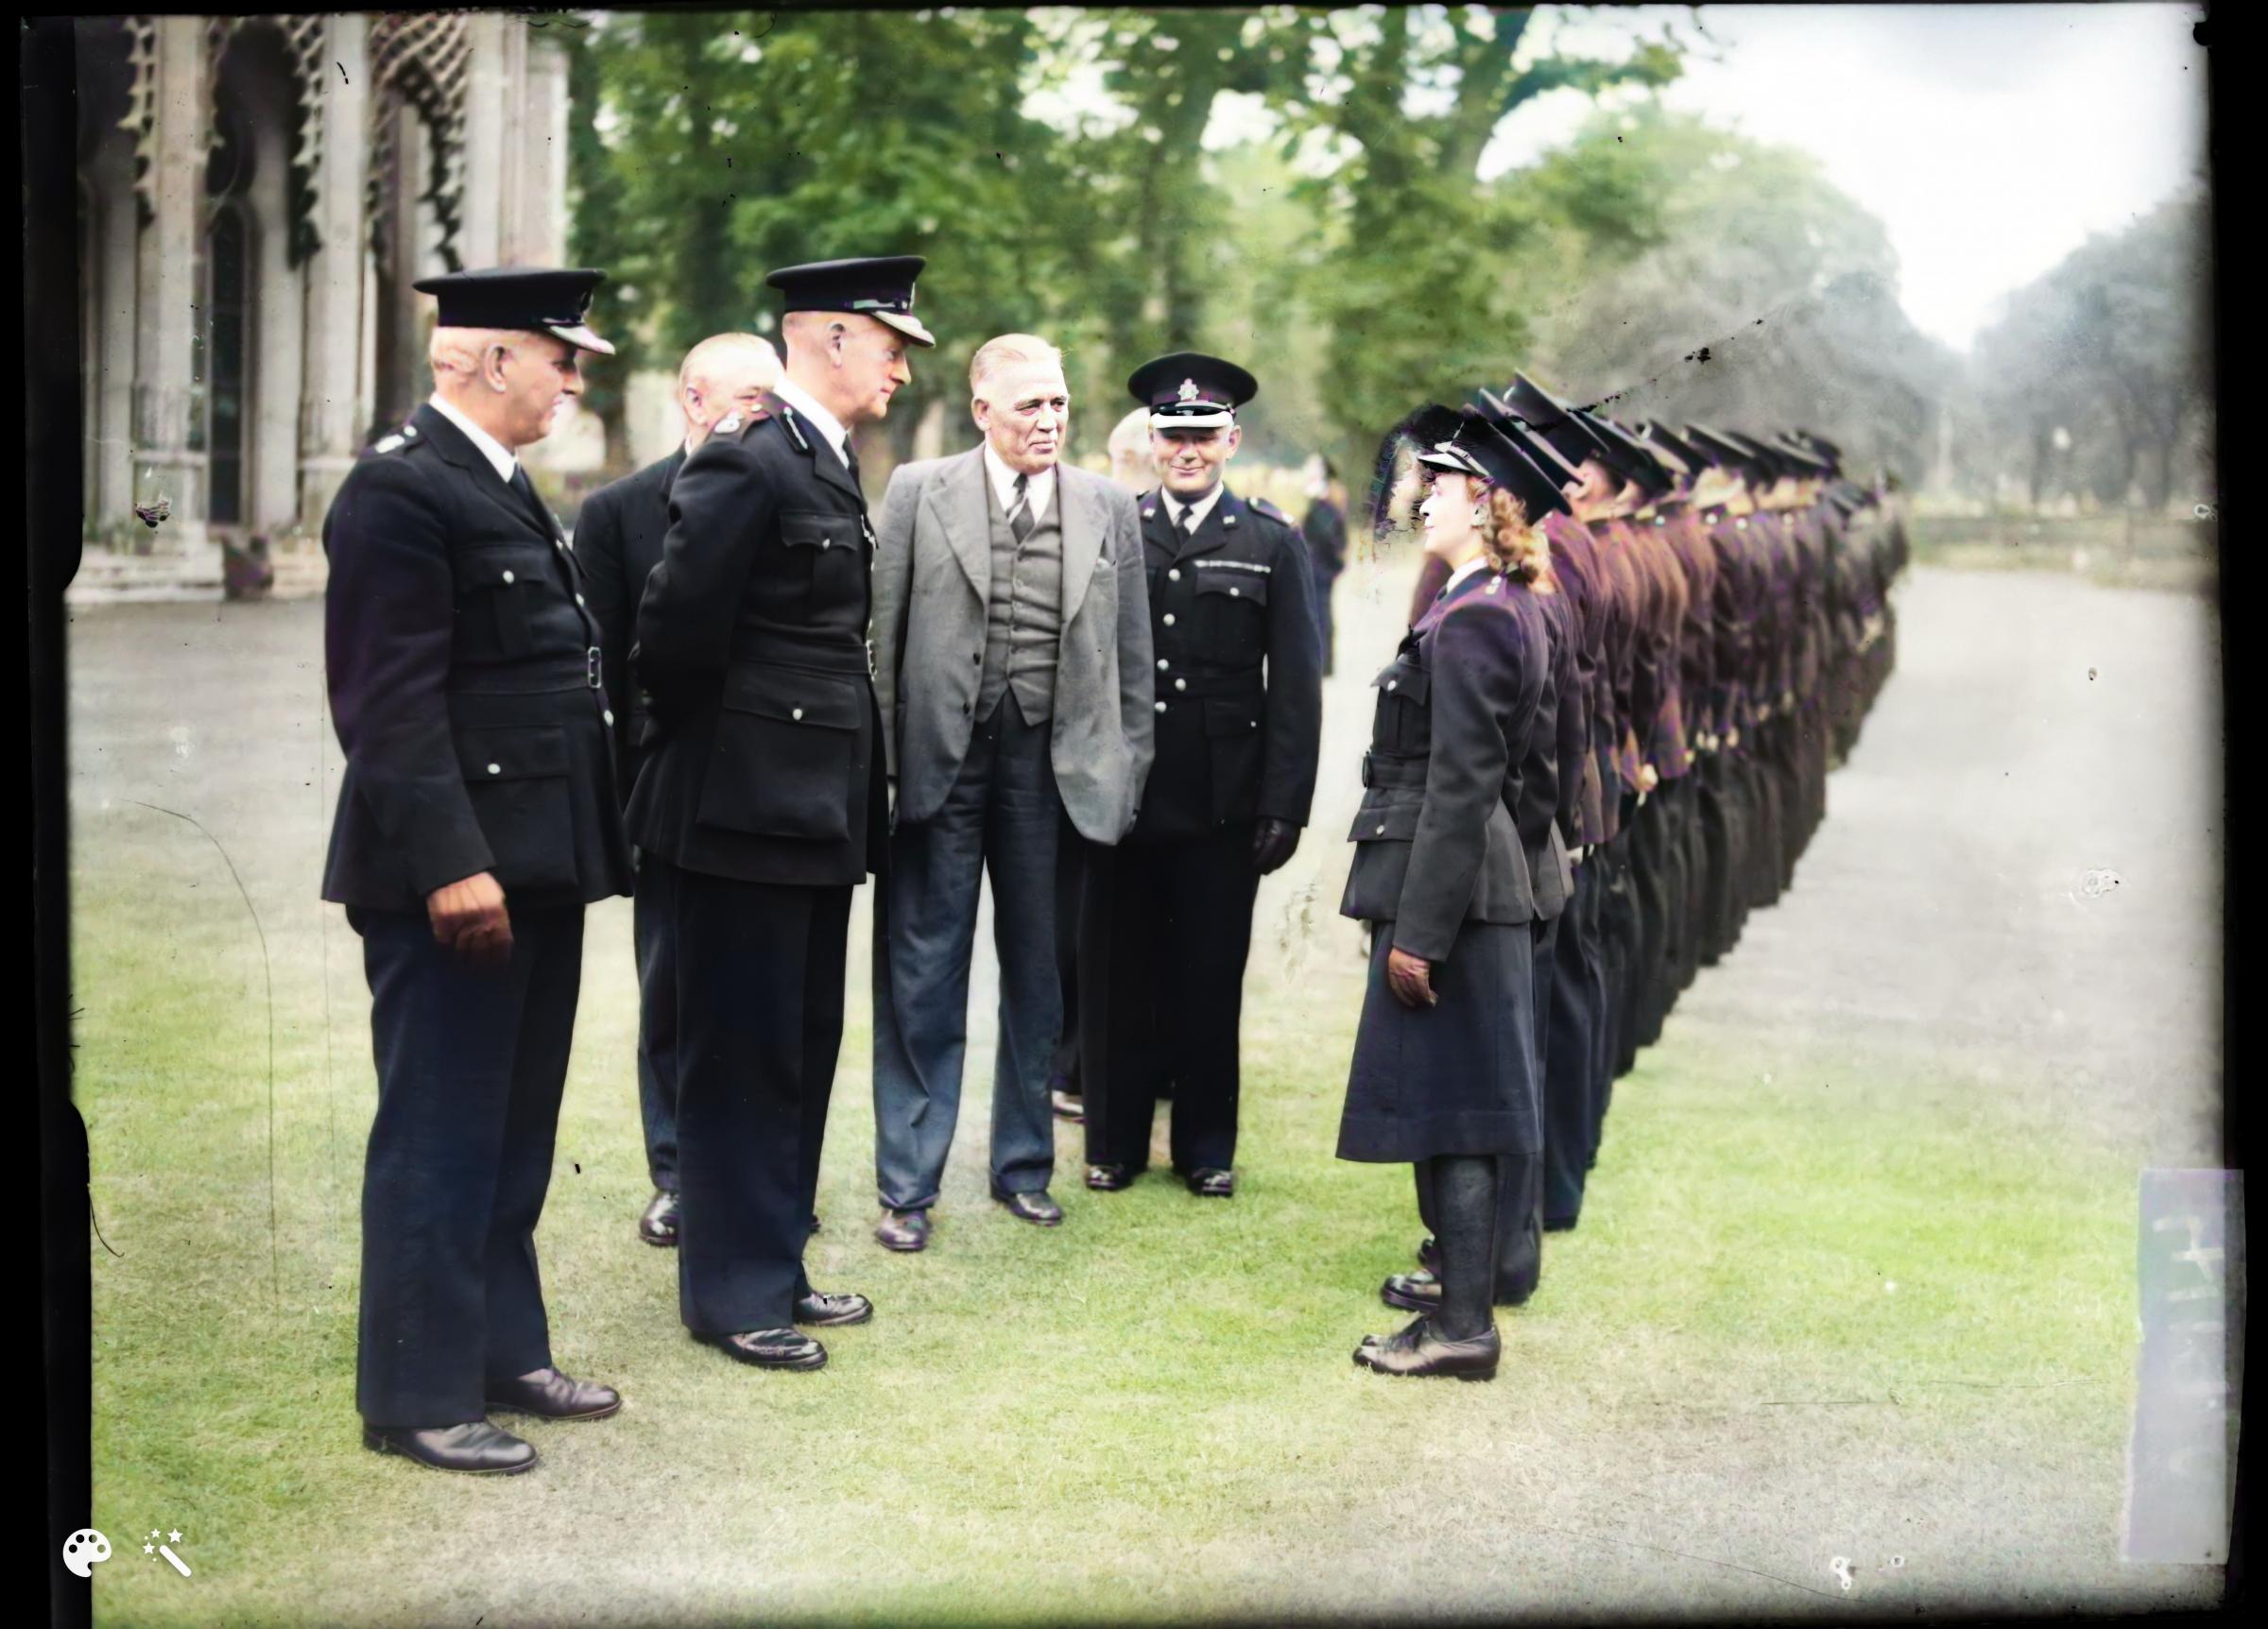 Police cadets inspection, 1951